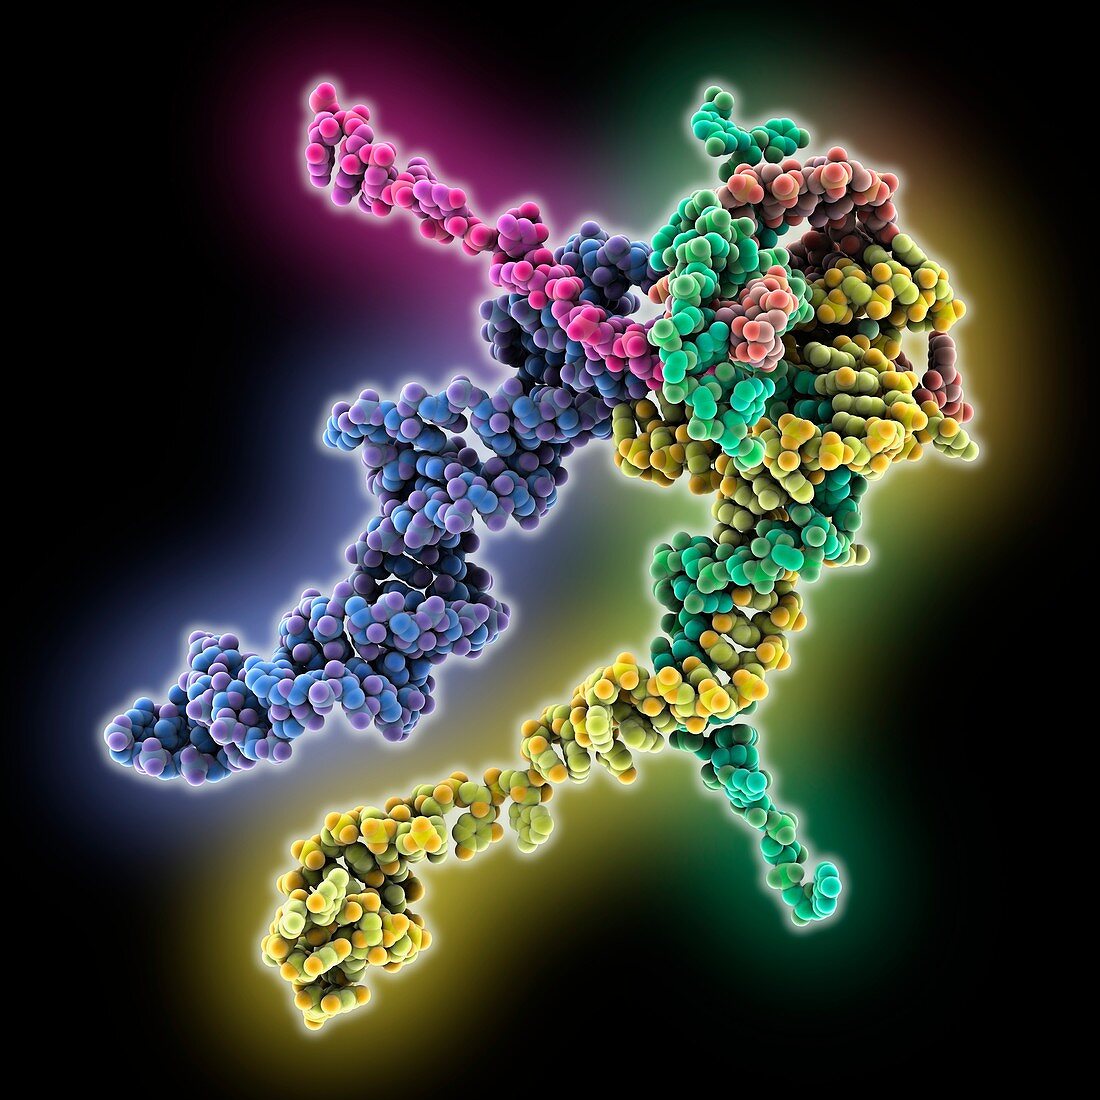 Human spliceosome, nucleic acids only, molecular model